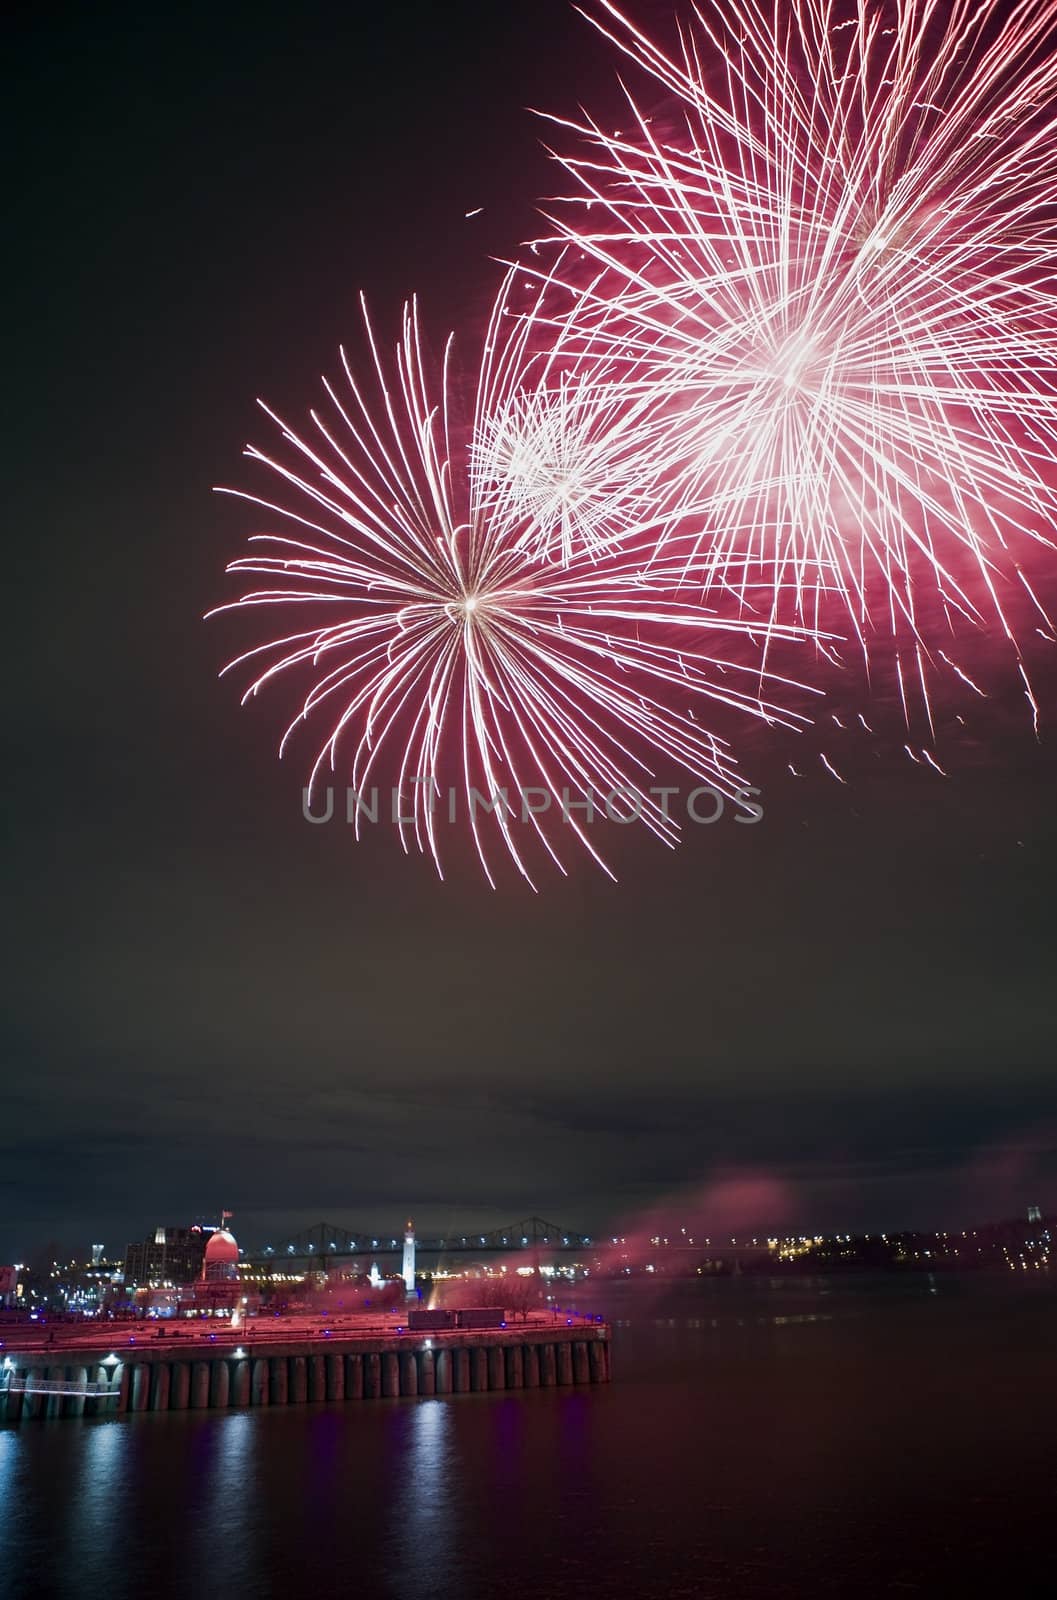 Montreal, Quebec, Canada - Night fireworks display. Jacques Cartier bridge visible in the distance.